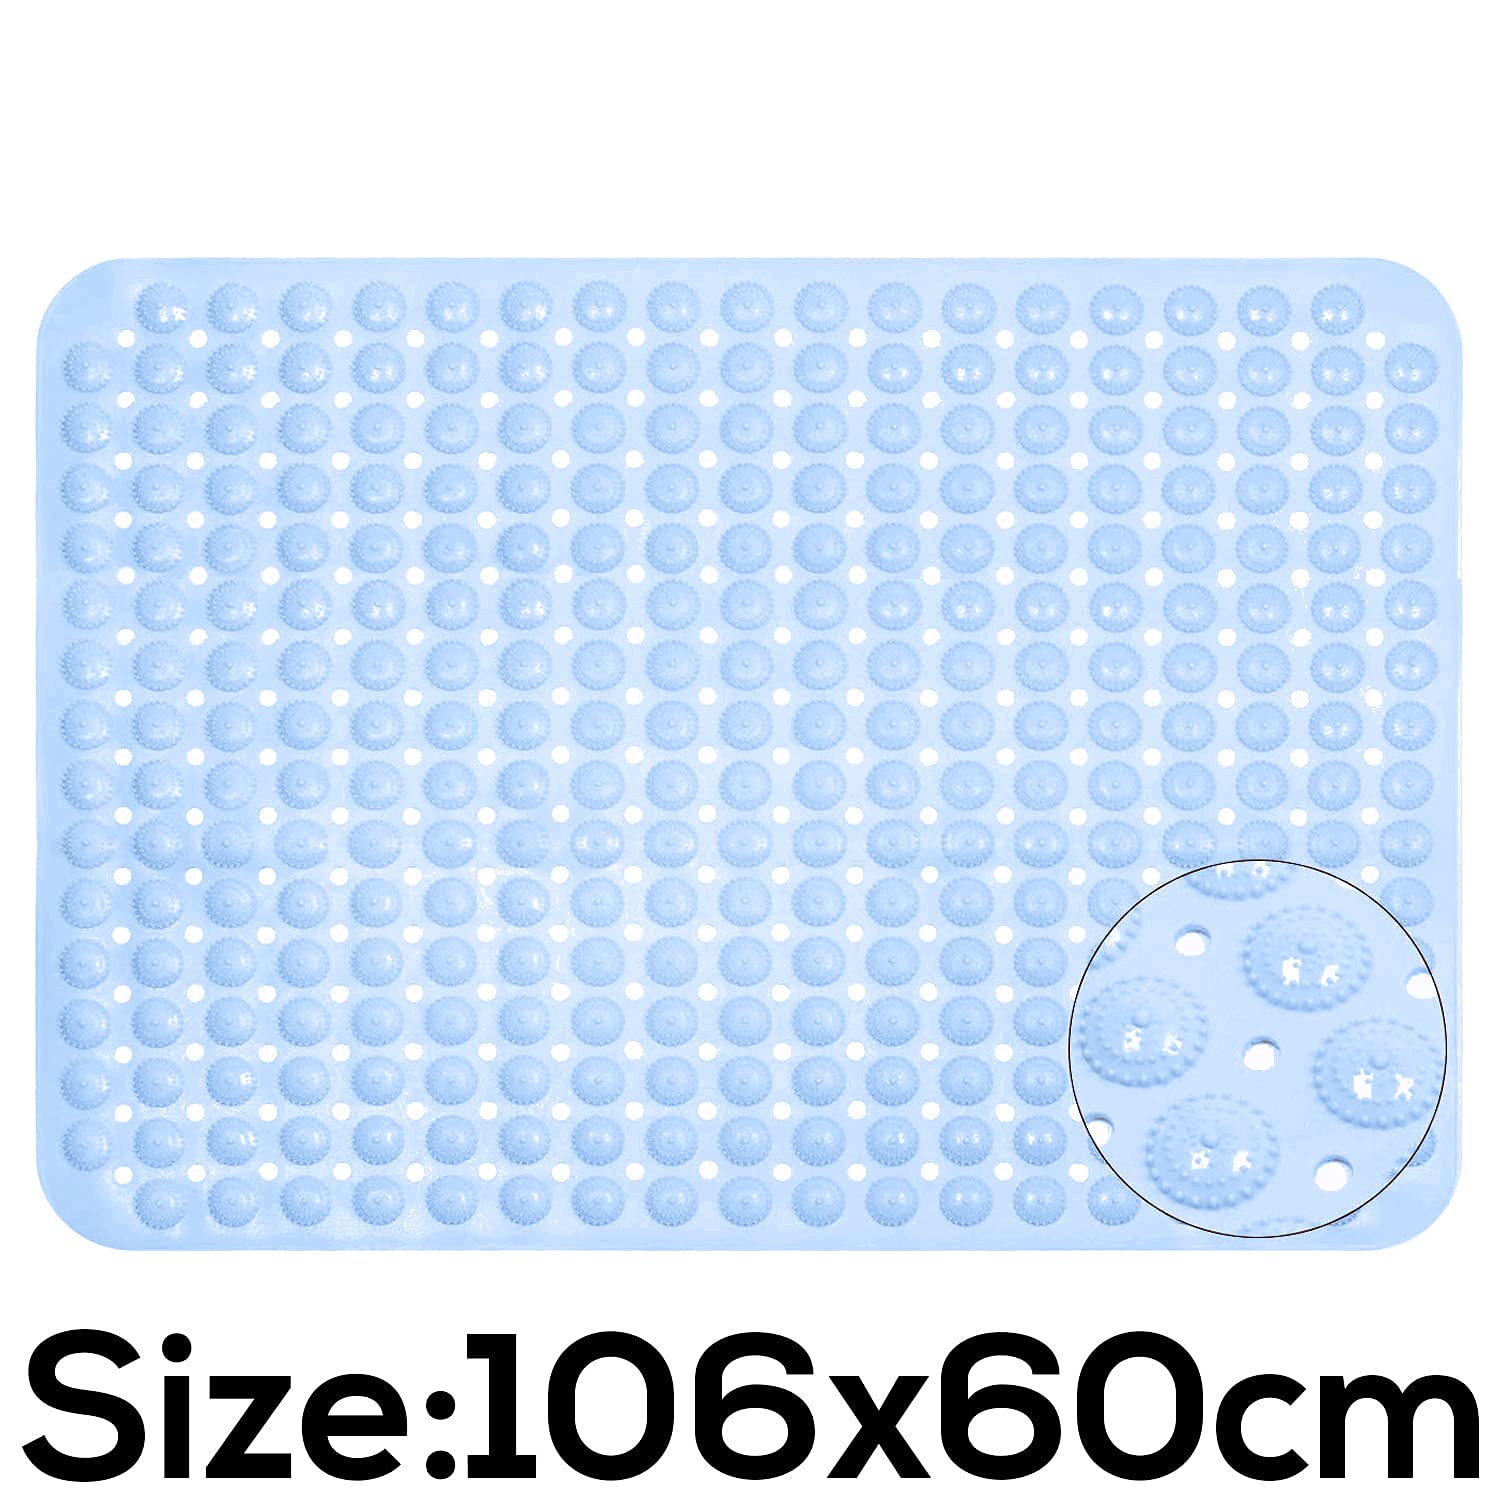 Experia Anti Slip Bath Mat with Suction Cup - 106 X 60 CM (Blue Color with Accu Pebble) LifeKrafts